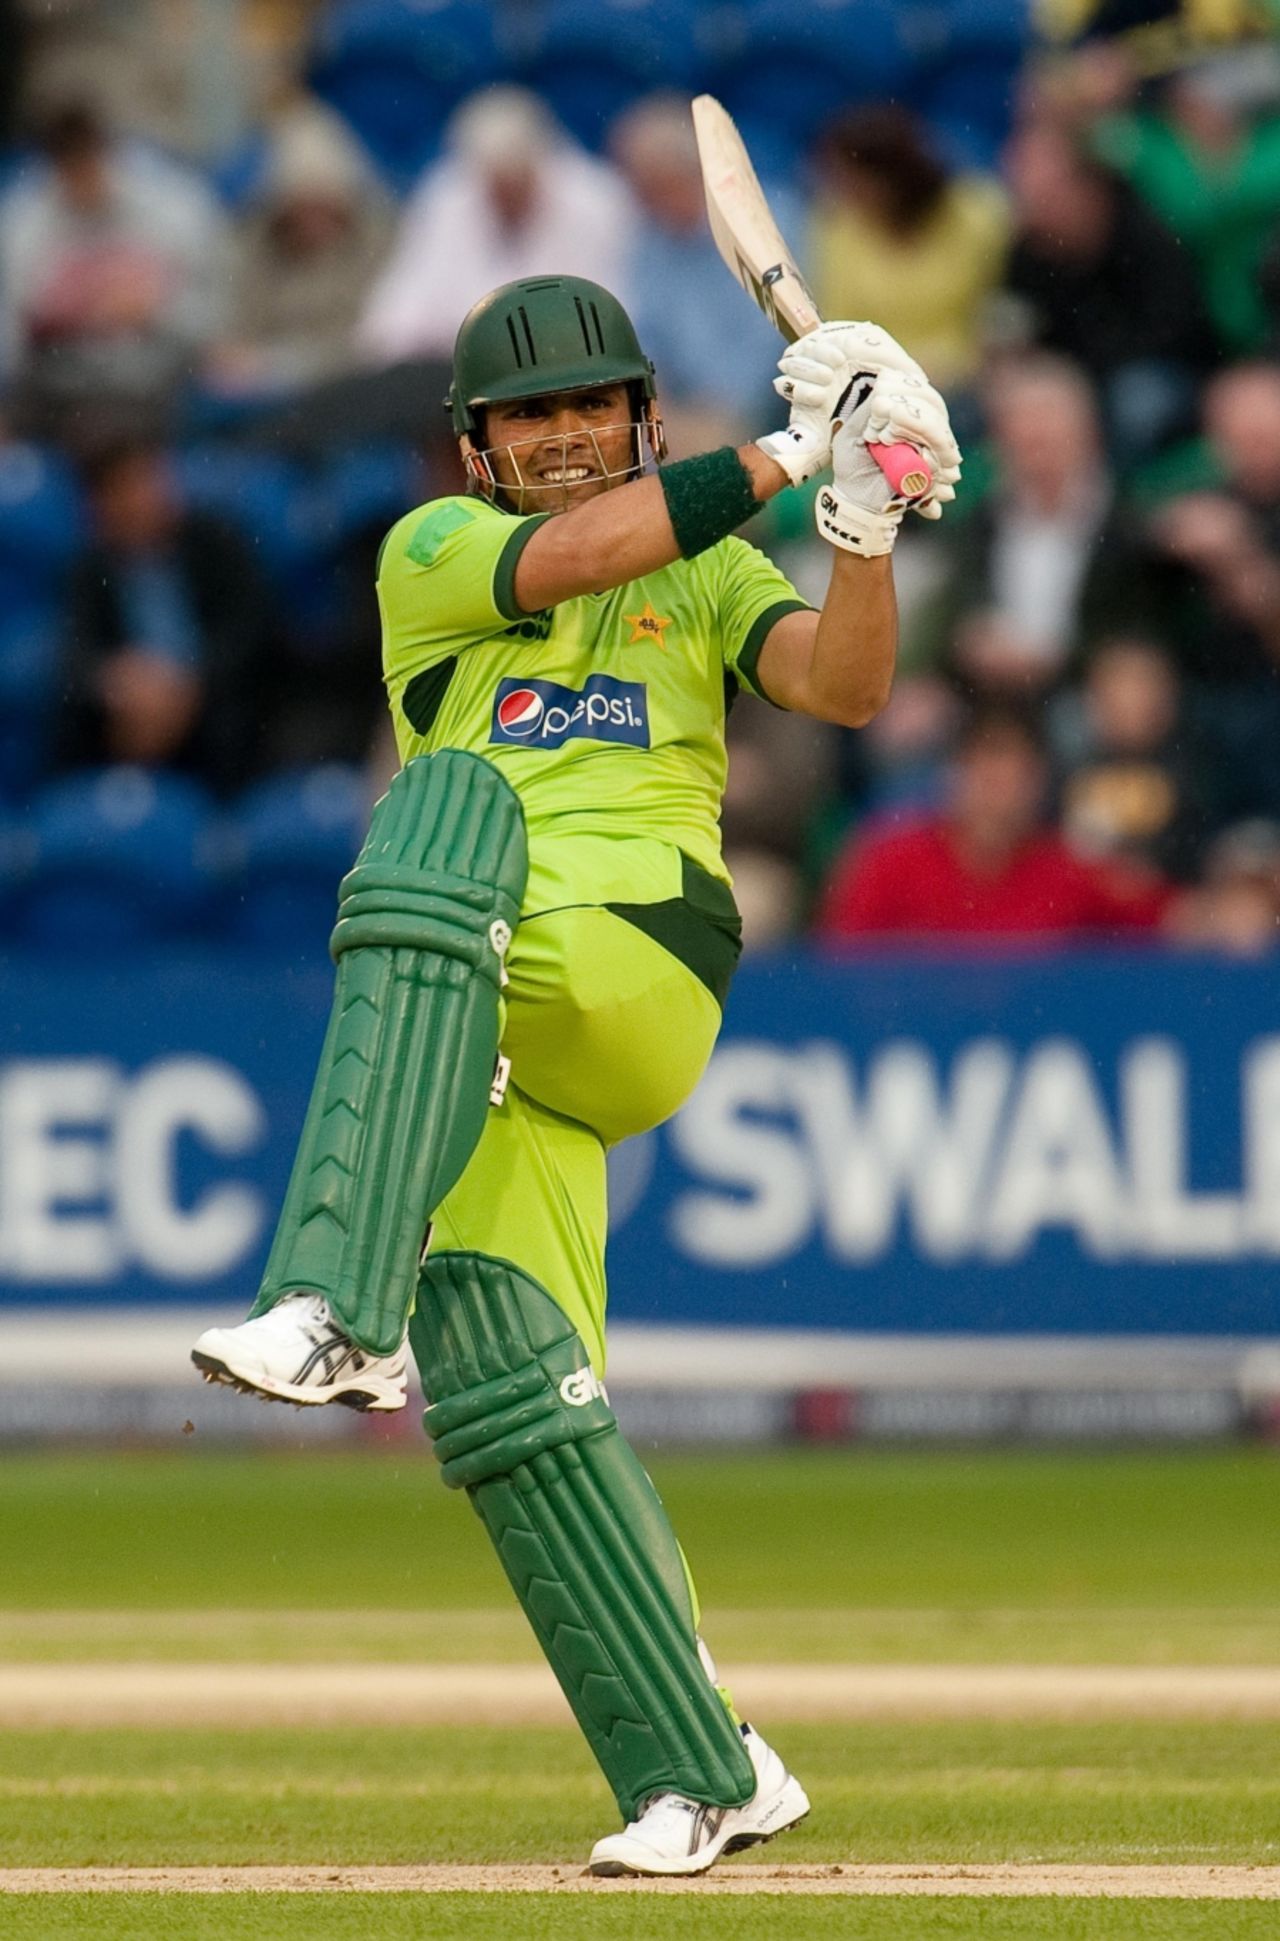 Kamran Akmal started aggressively but couldn't push on once again, England v Pakistan, 2nd T20I, Cardiff, September 7, 2010